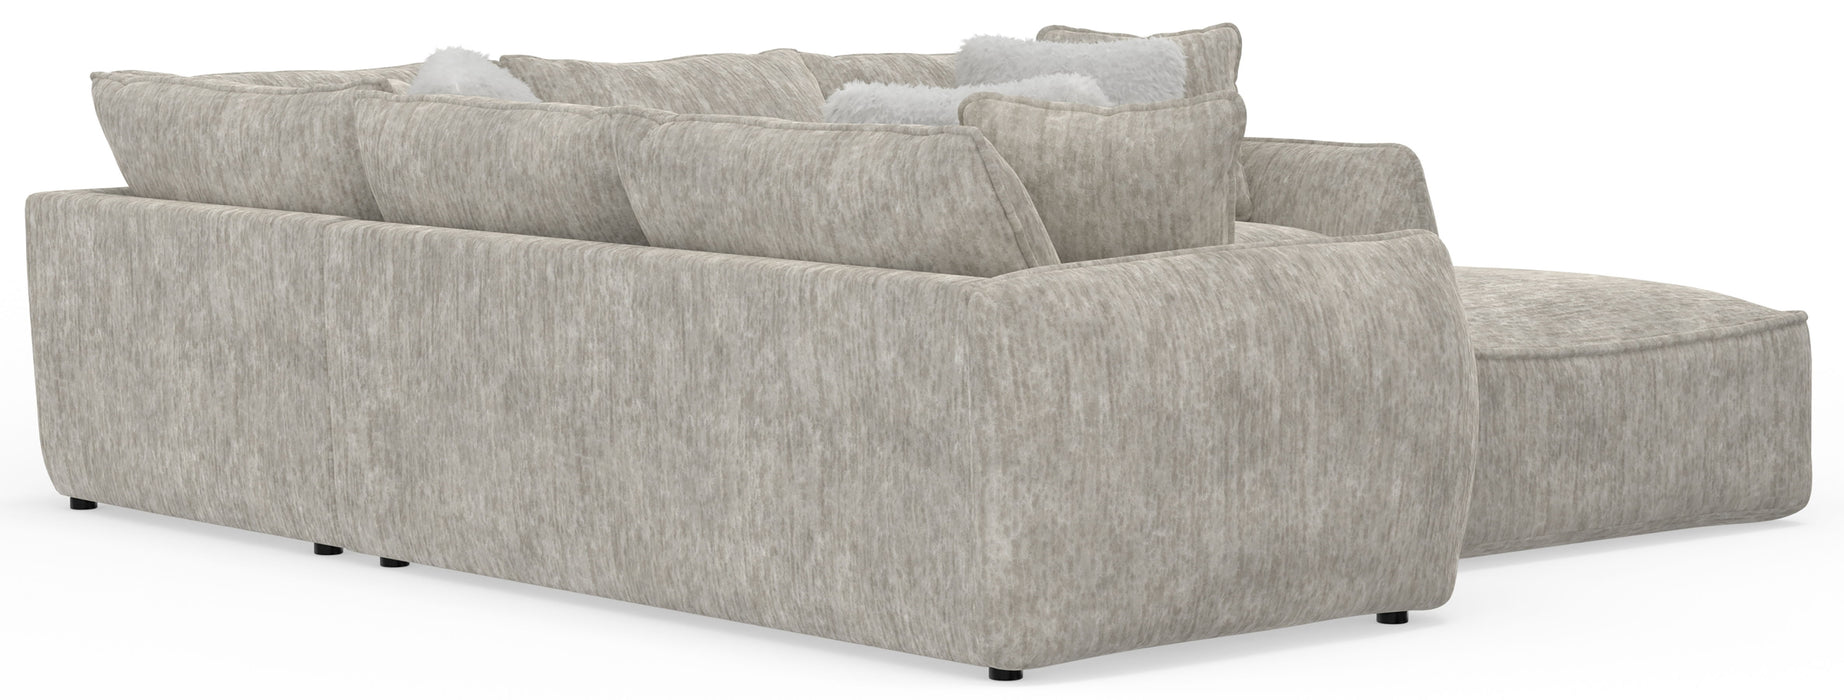 Bucktown - 3 Piece Sectional With Extra Thick Cuddler Seat Cushions And Cocktail Ottoman - Parchment